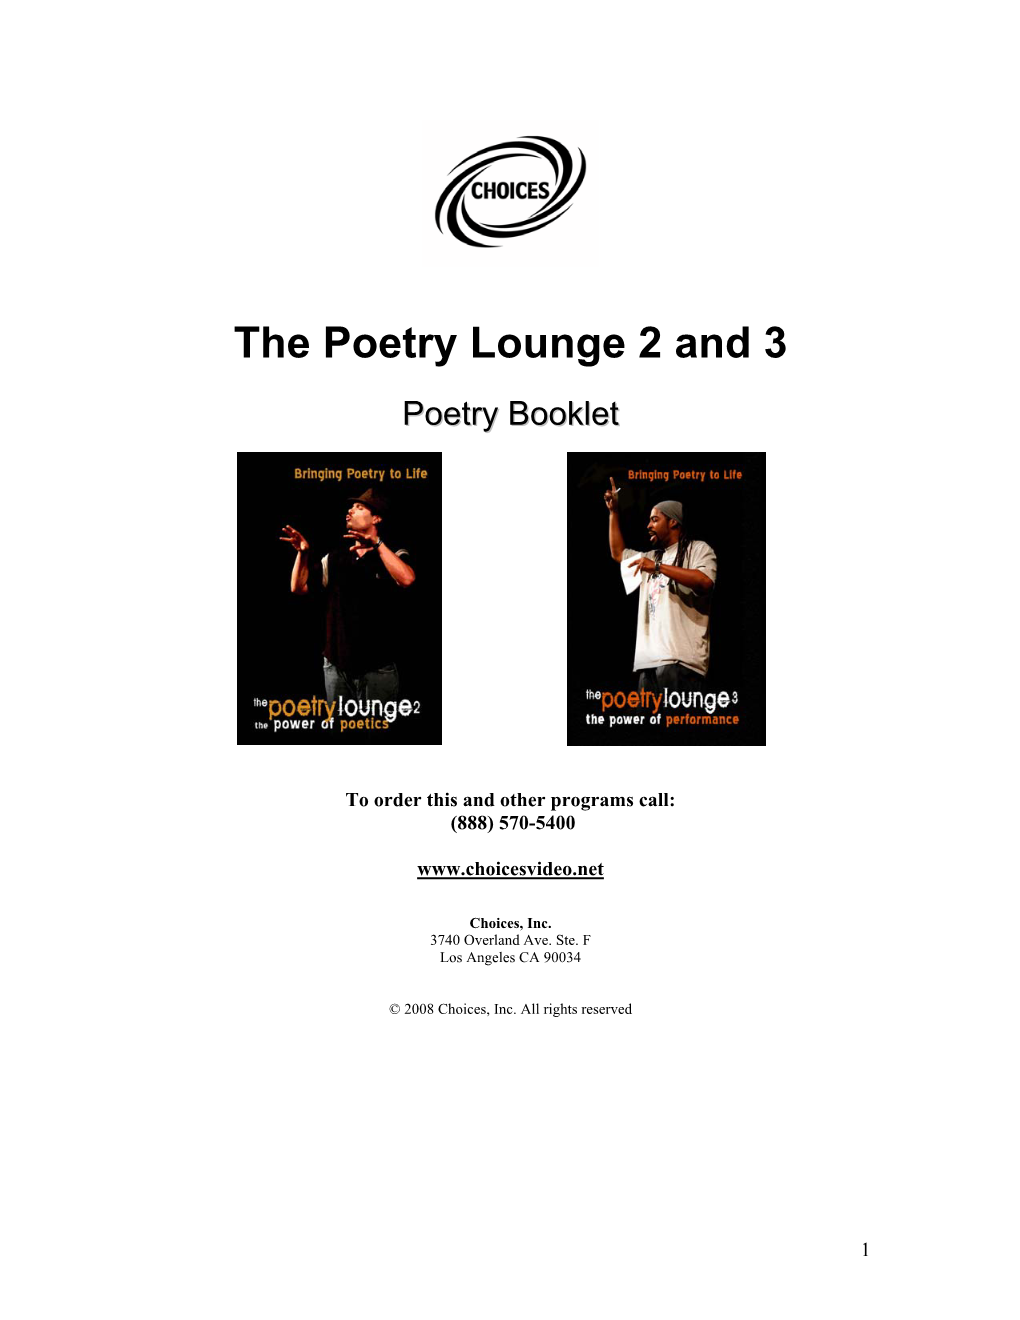 The Poetry Lounge 2 and 3 Poetry Booklet